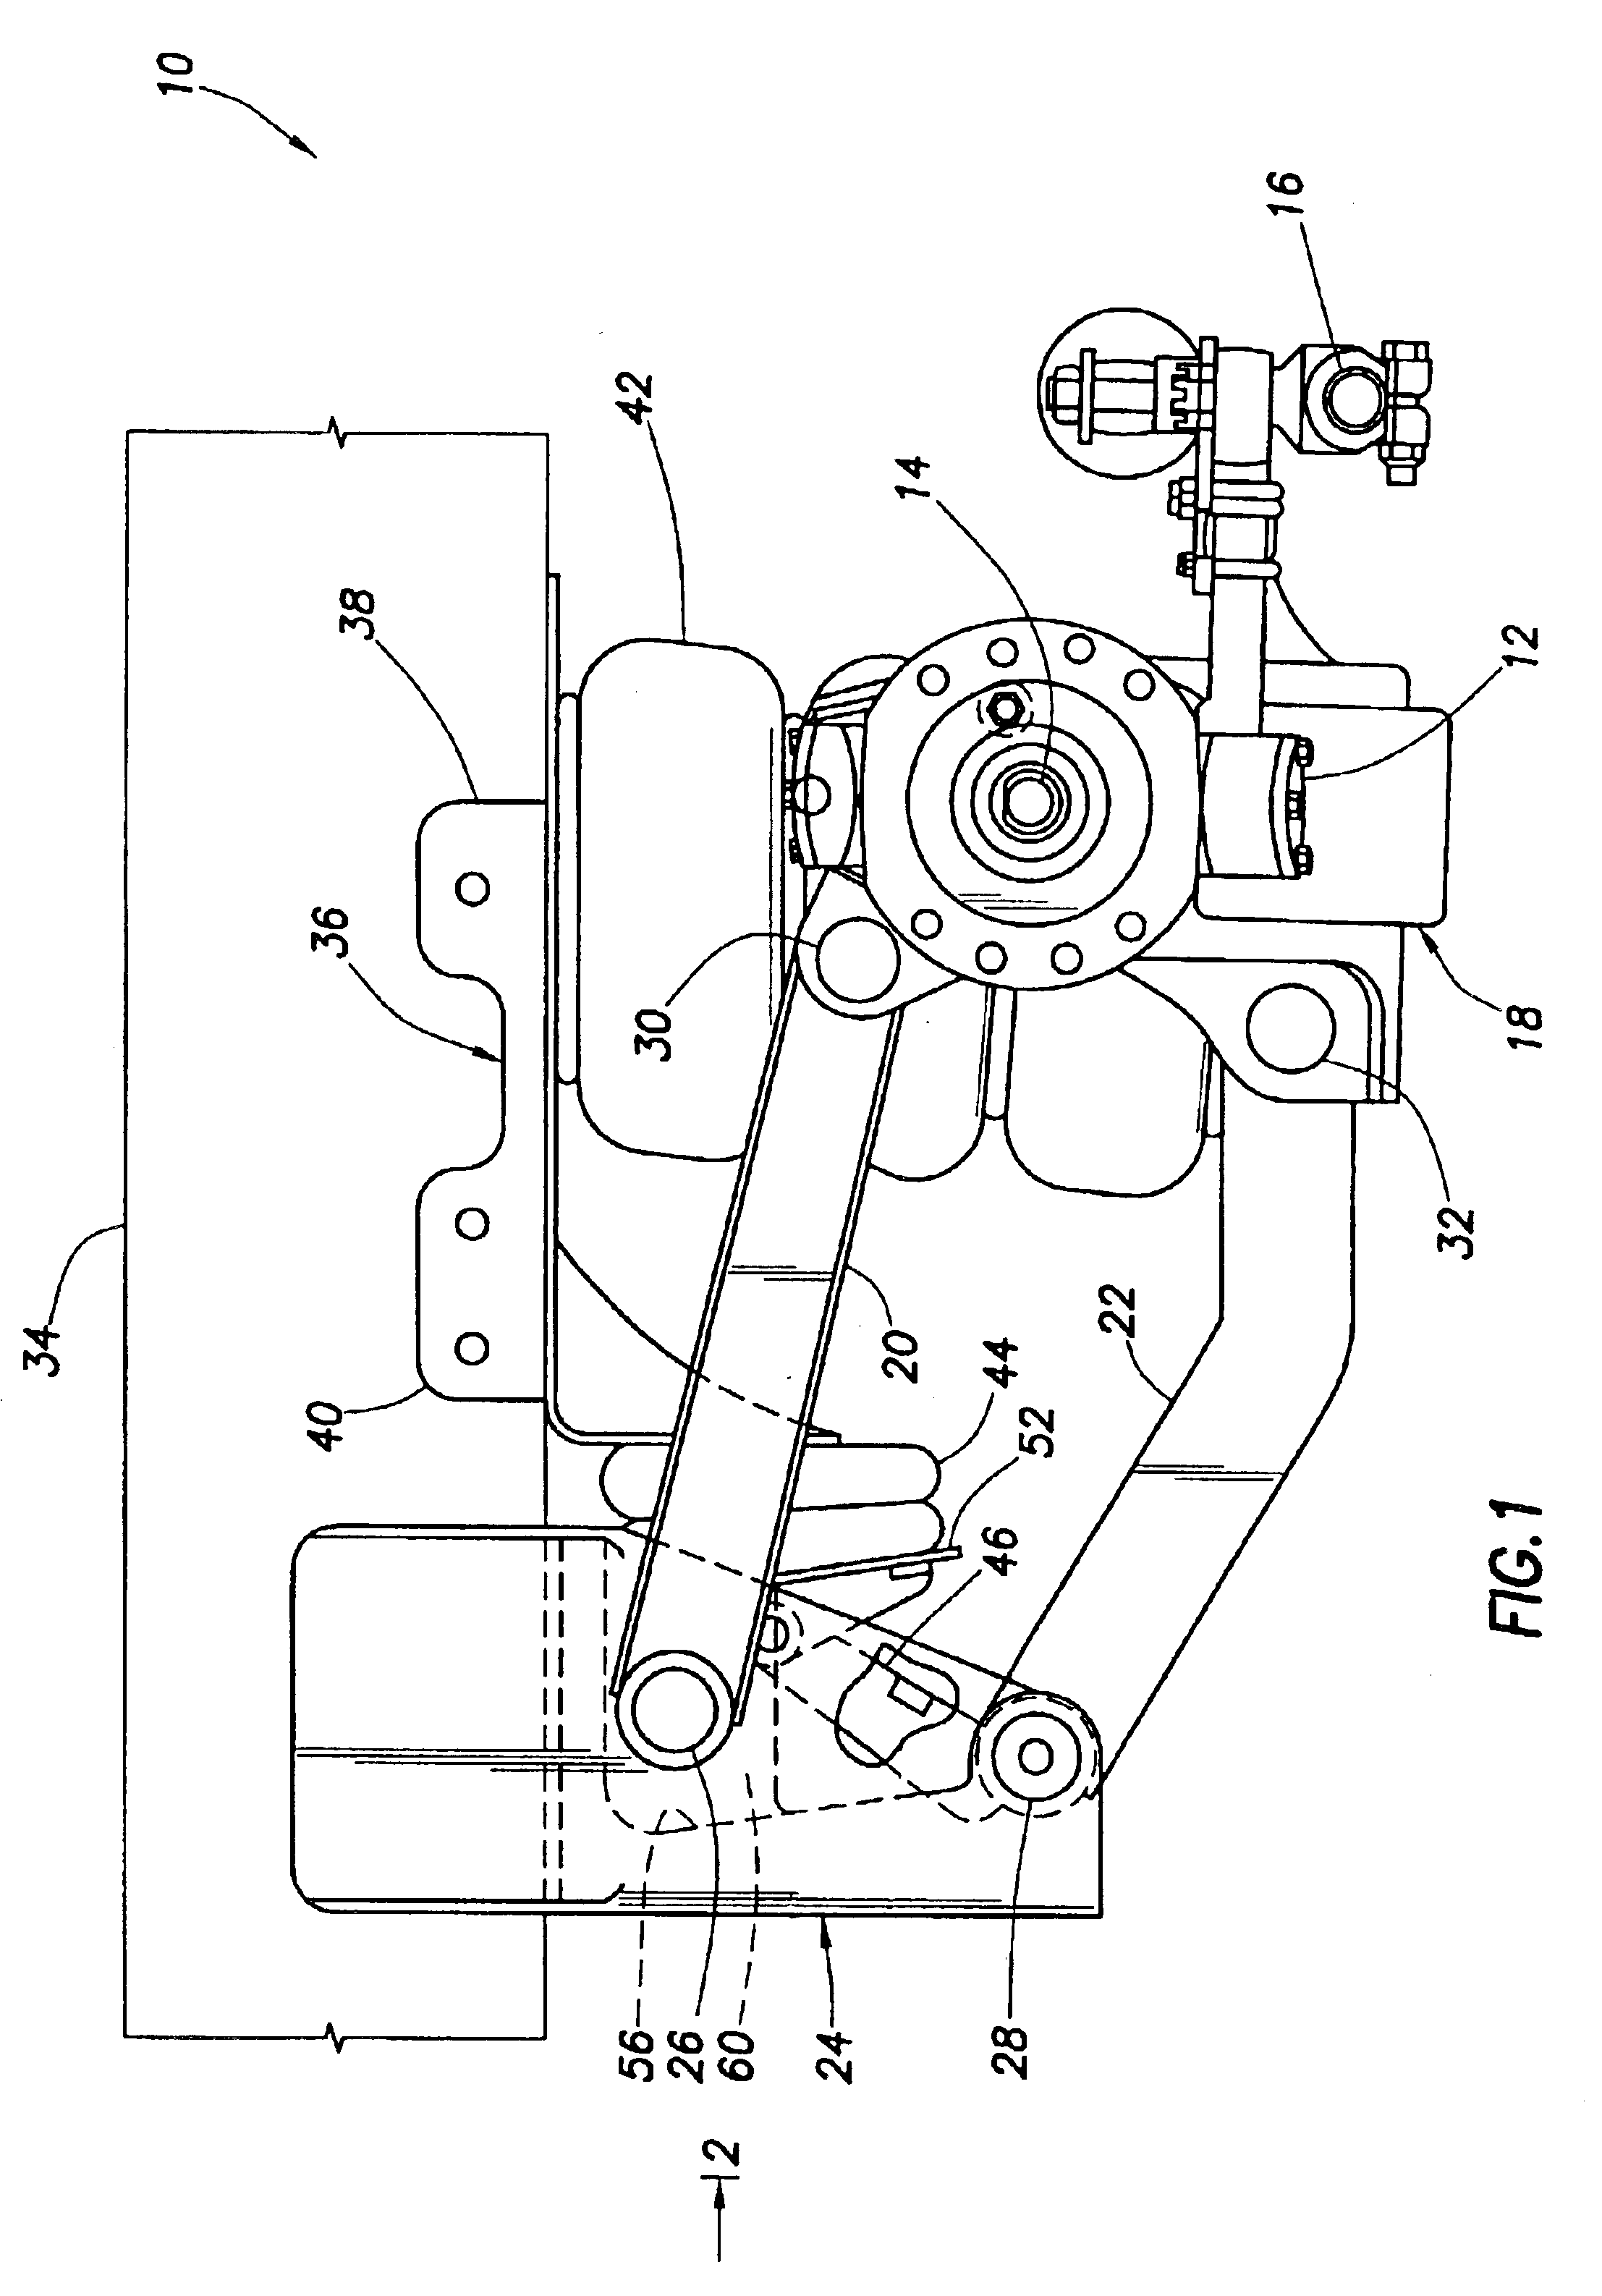 Lift axle suspension system